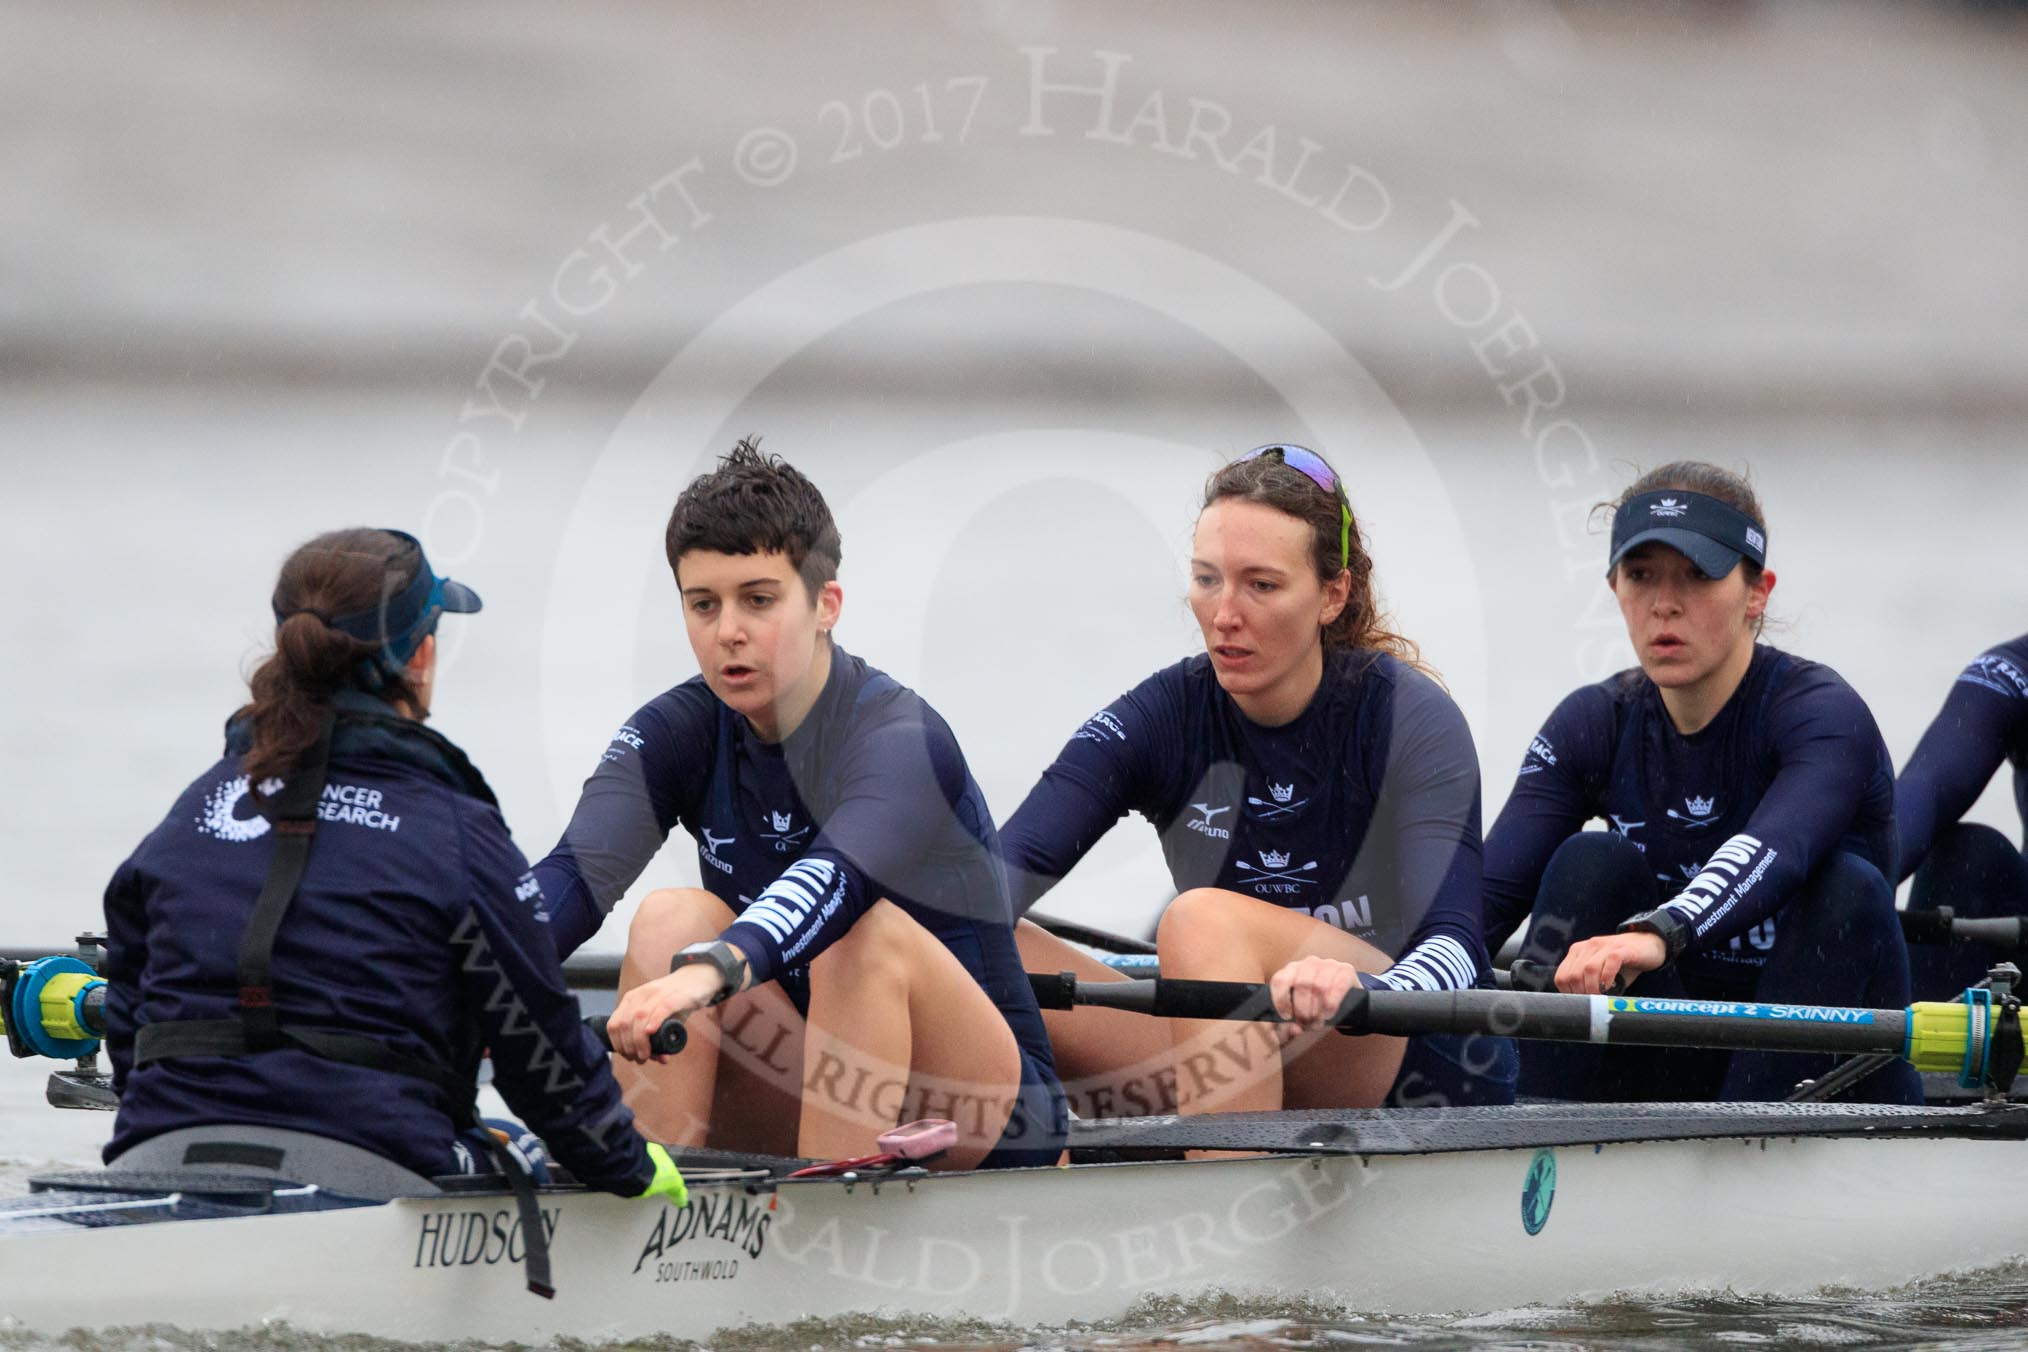 The Boat Race season 2018 - Women's Boat Race Trial Eights (OUWBC, Oxford): "Great Typhoon" seconds after the race has been started - cox Jessica Buck, stroke Alice Roberts,  7 Abigail Killen, 6 Sara Kushma, 5 Olivia Pryer.
River Thames between Putney Bridge and Mortlake,
London SW15,

United Kingdom,
on 21 January 2018 at 14:28, image #58